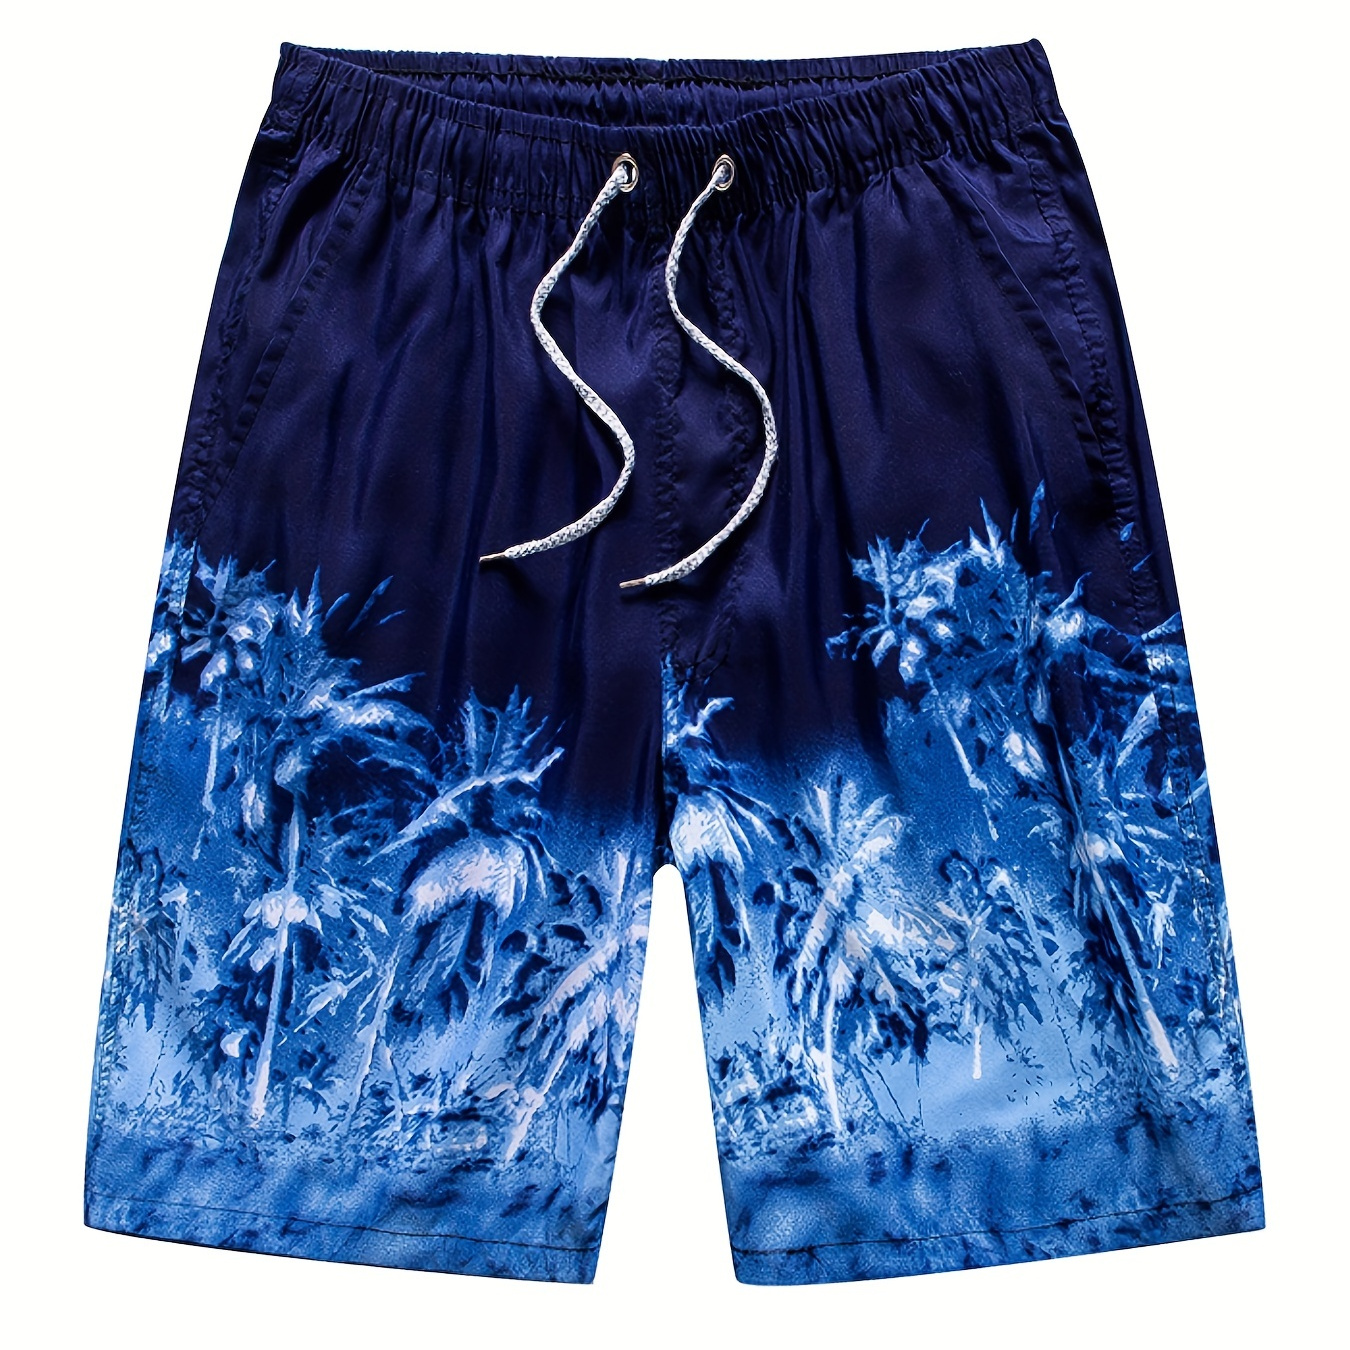 

Palm Trees Ombre Print Shorts Casual Summer Pool Beach Shorts, Men’s Lounge Shorts, Loungewear